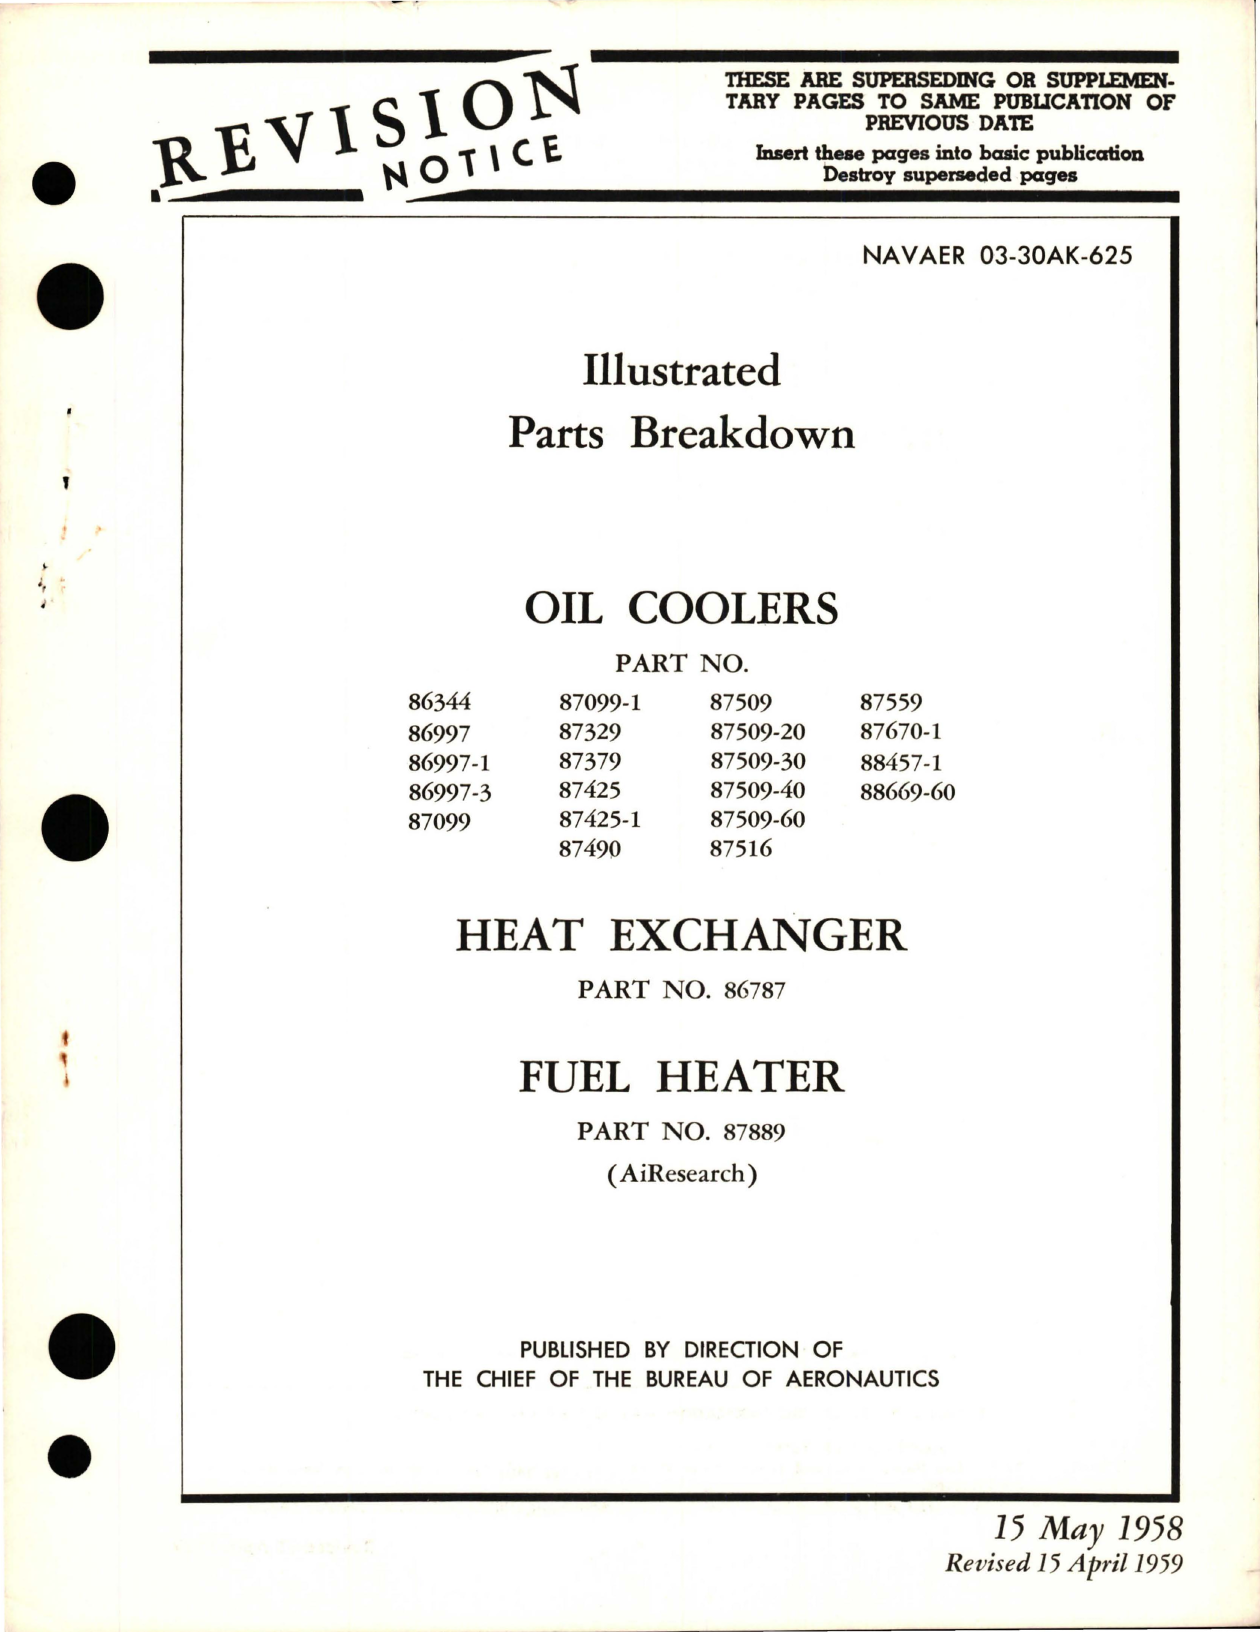 Sample page 1 from AirCorps Library document: Illustrated Parts Breakdown for Oil Coolers, Heat Exchanger, and Fuel Heater